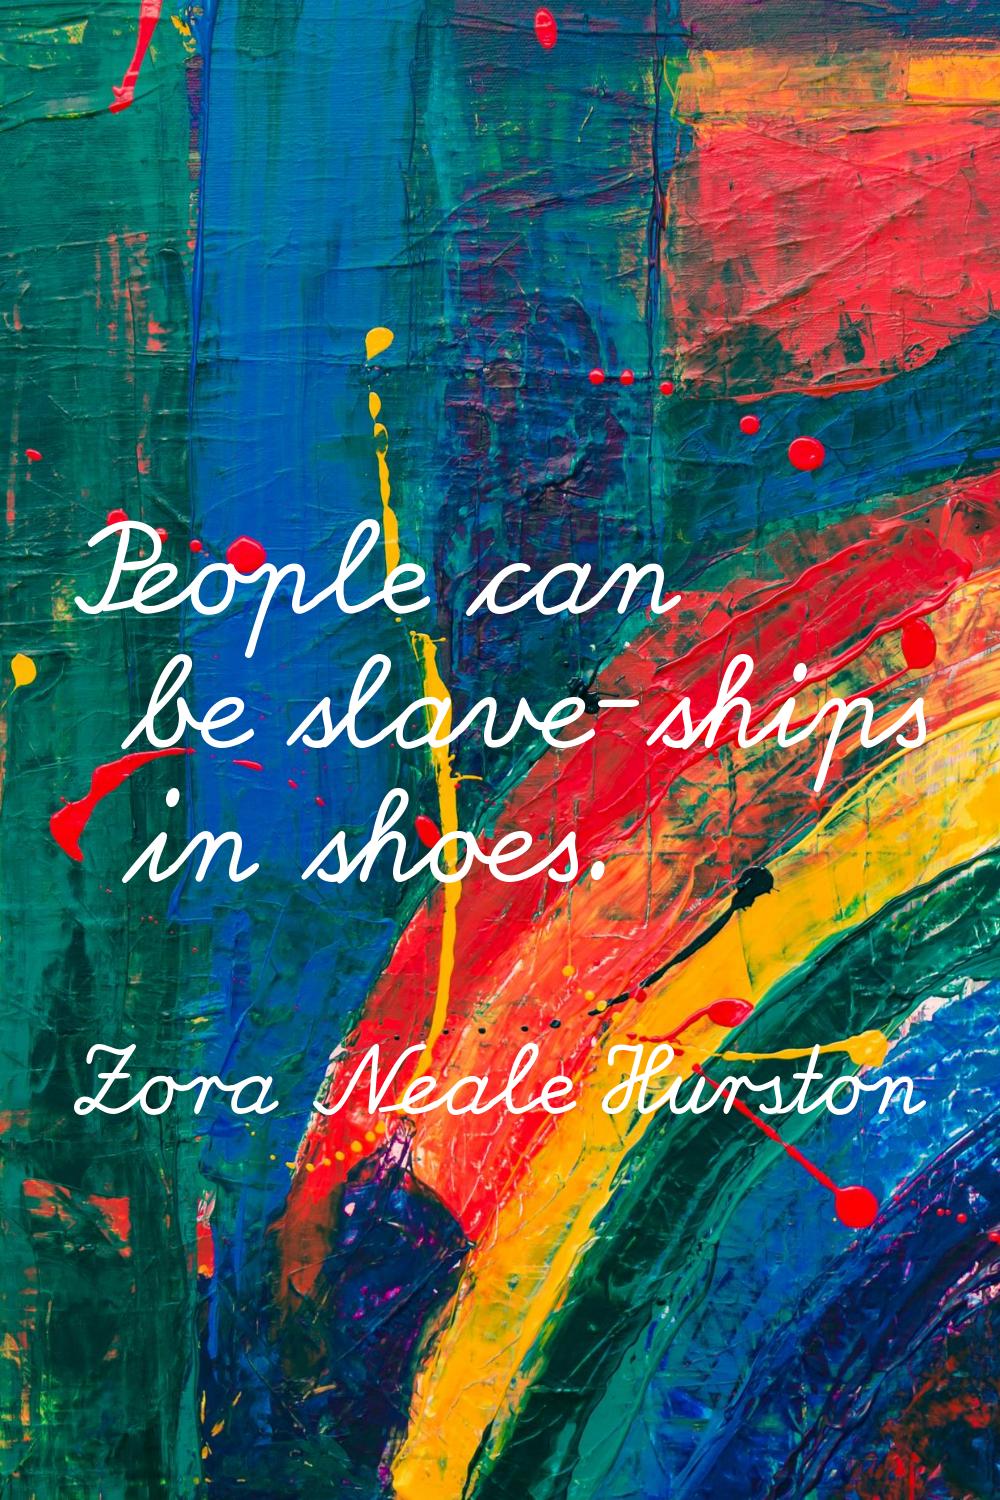 People can be slave-ships in shoes.